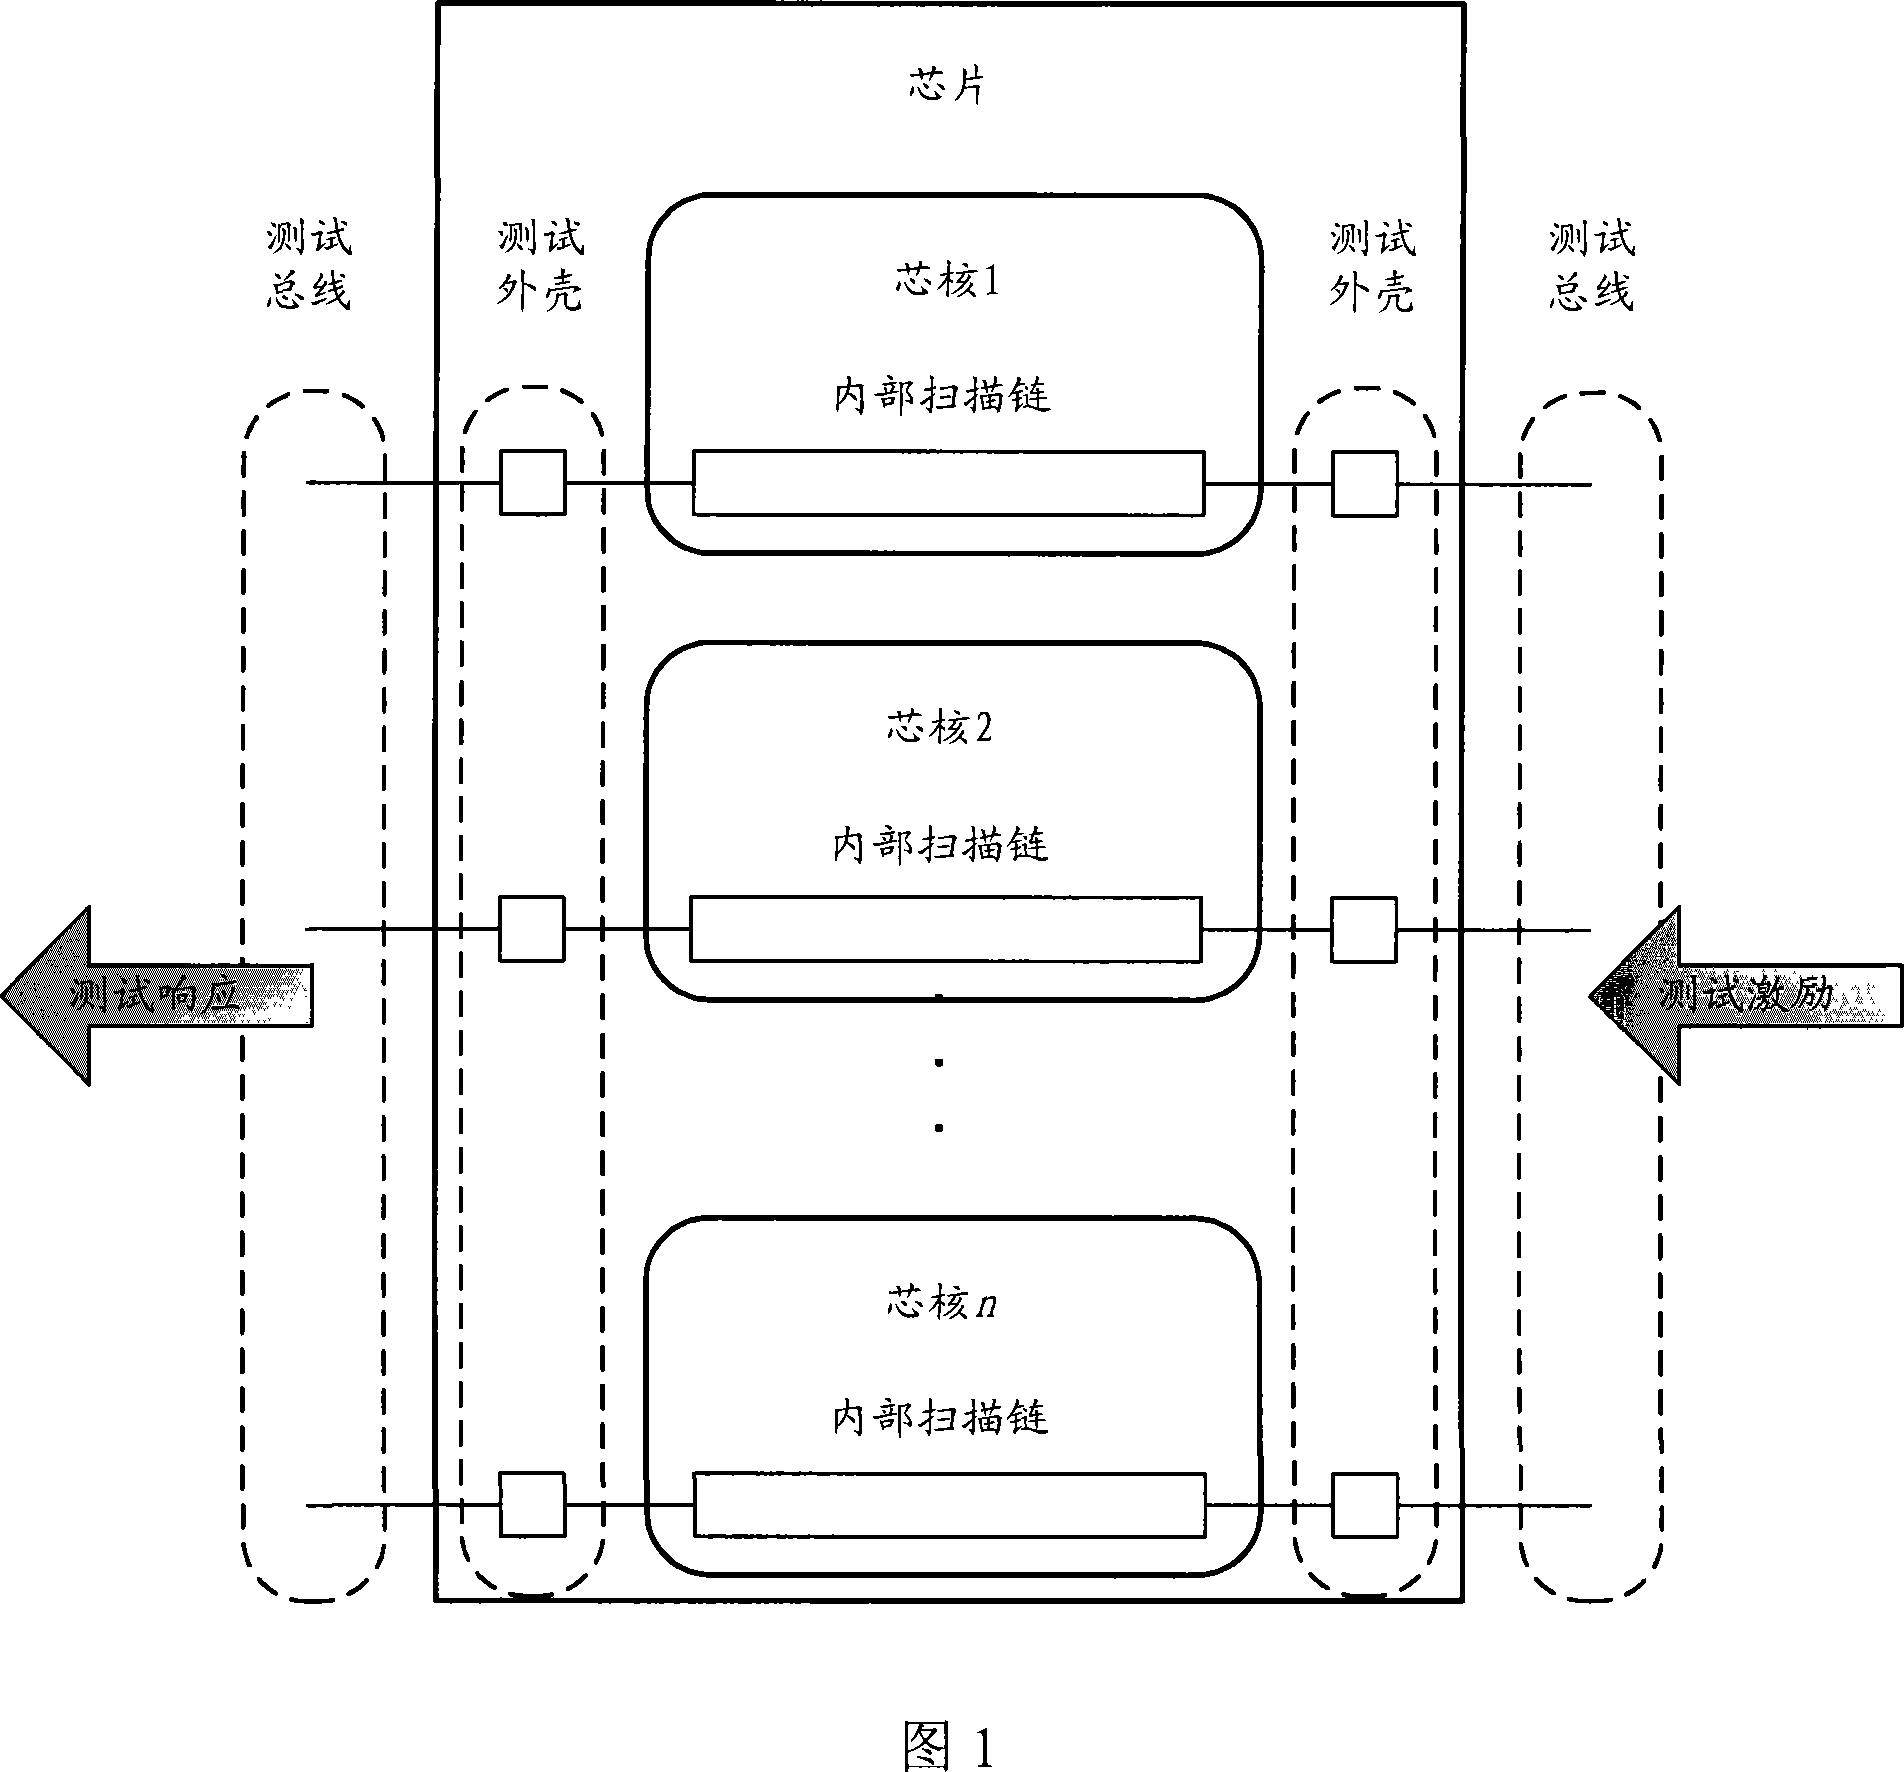 Test circuit of on-chip multicore processor and design method of testability